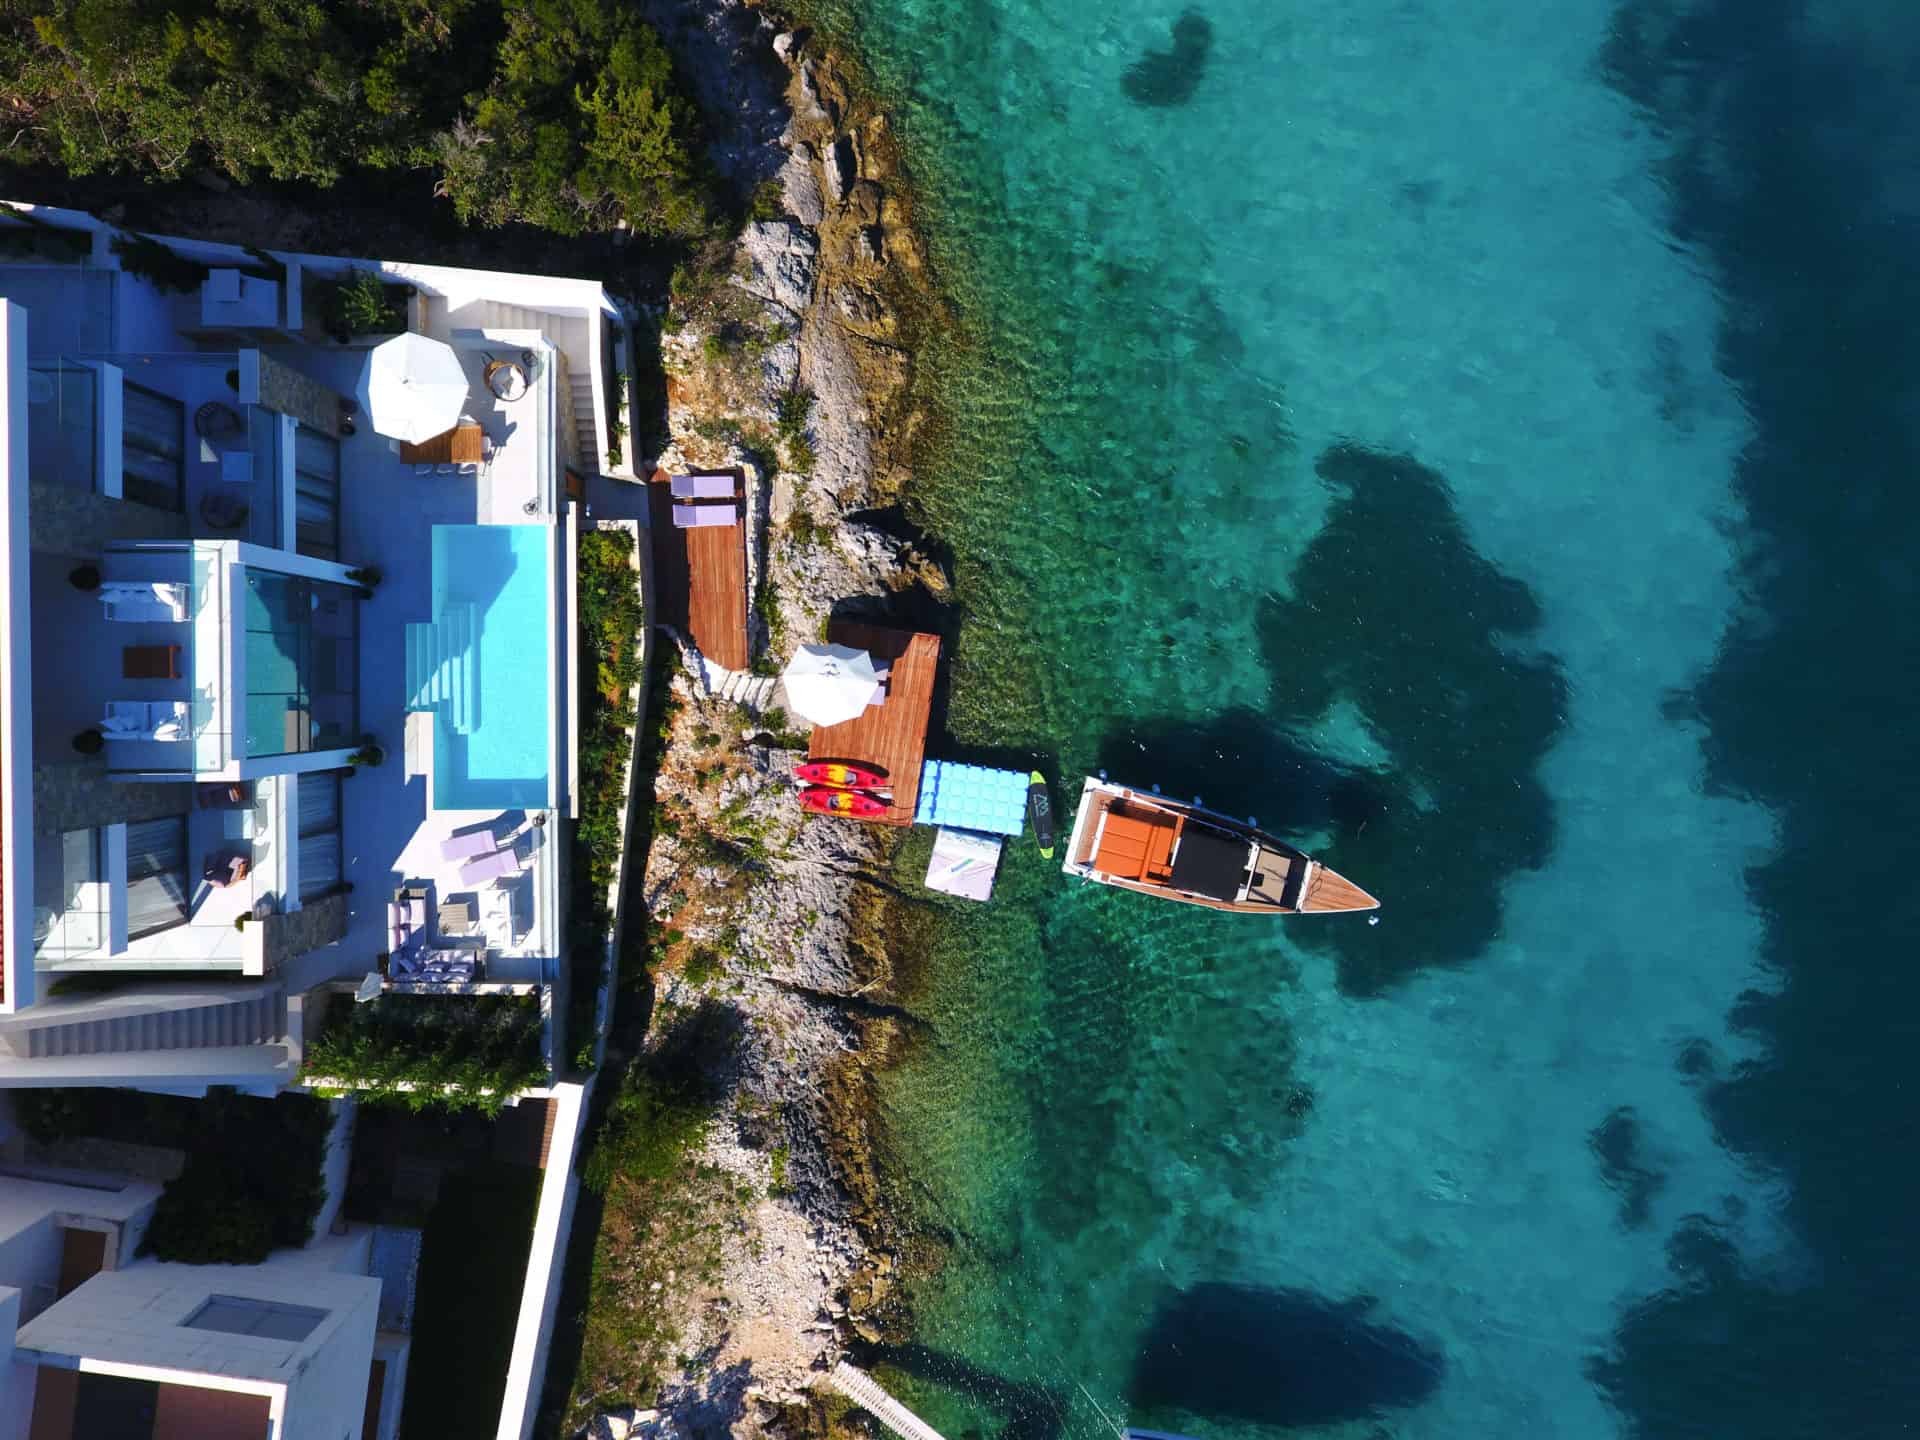 The yacht and the villa with a poll on the image taken from above.